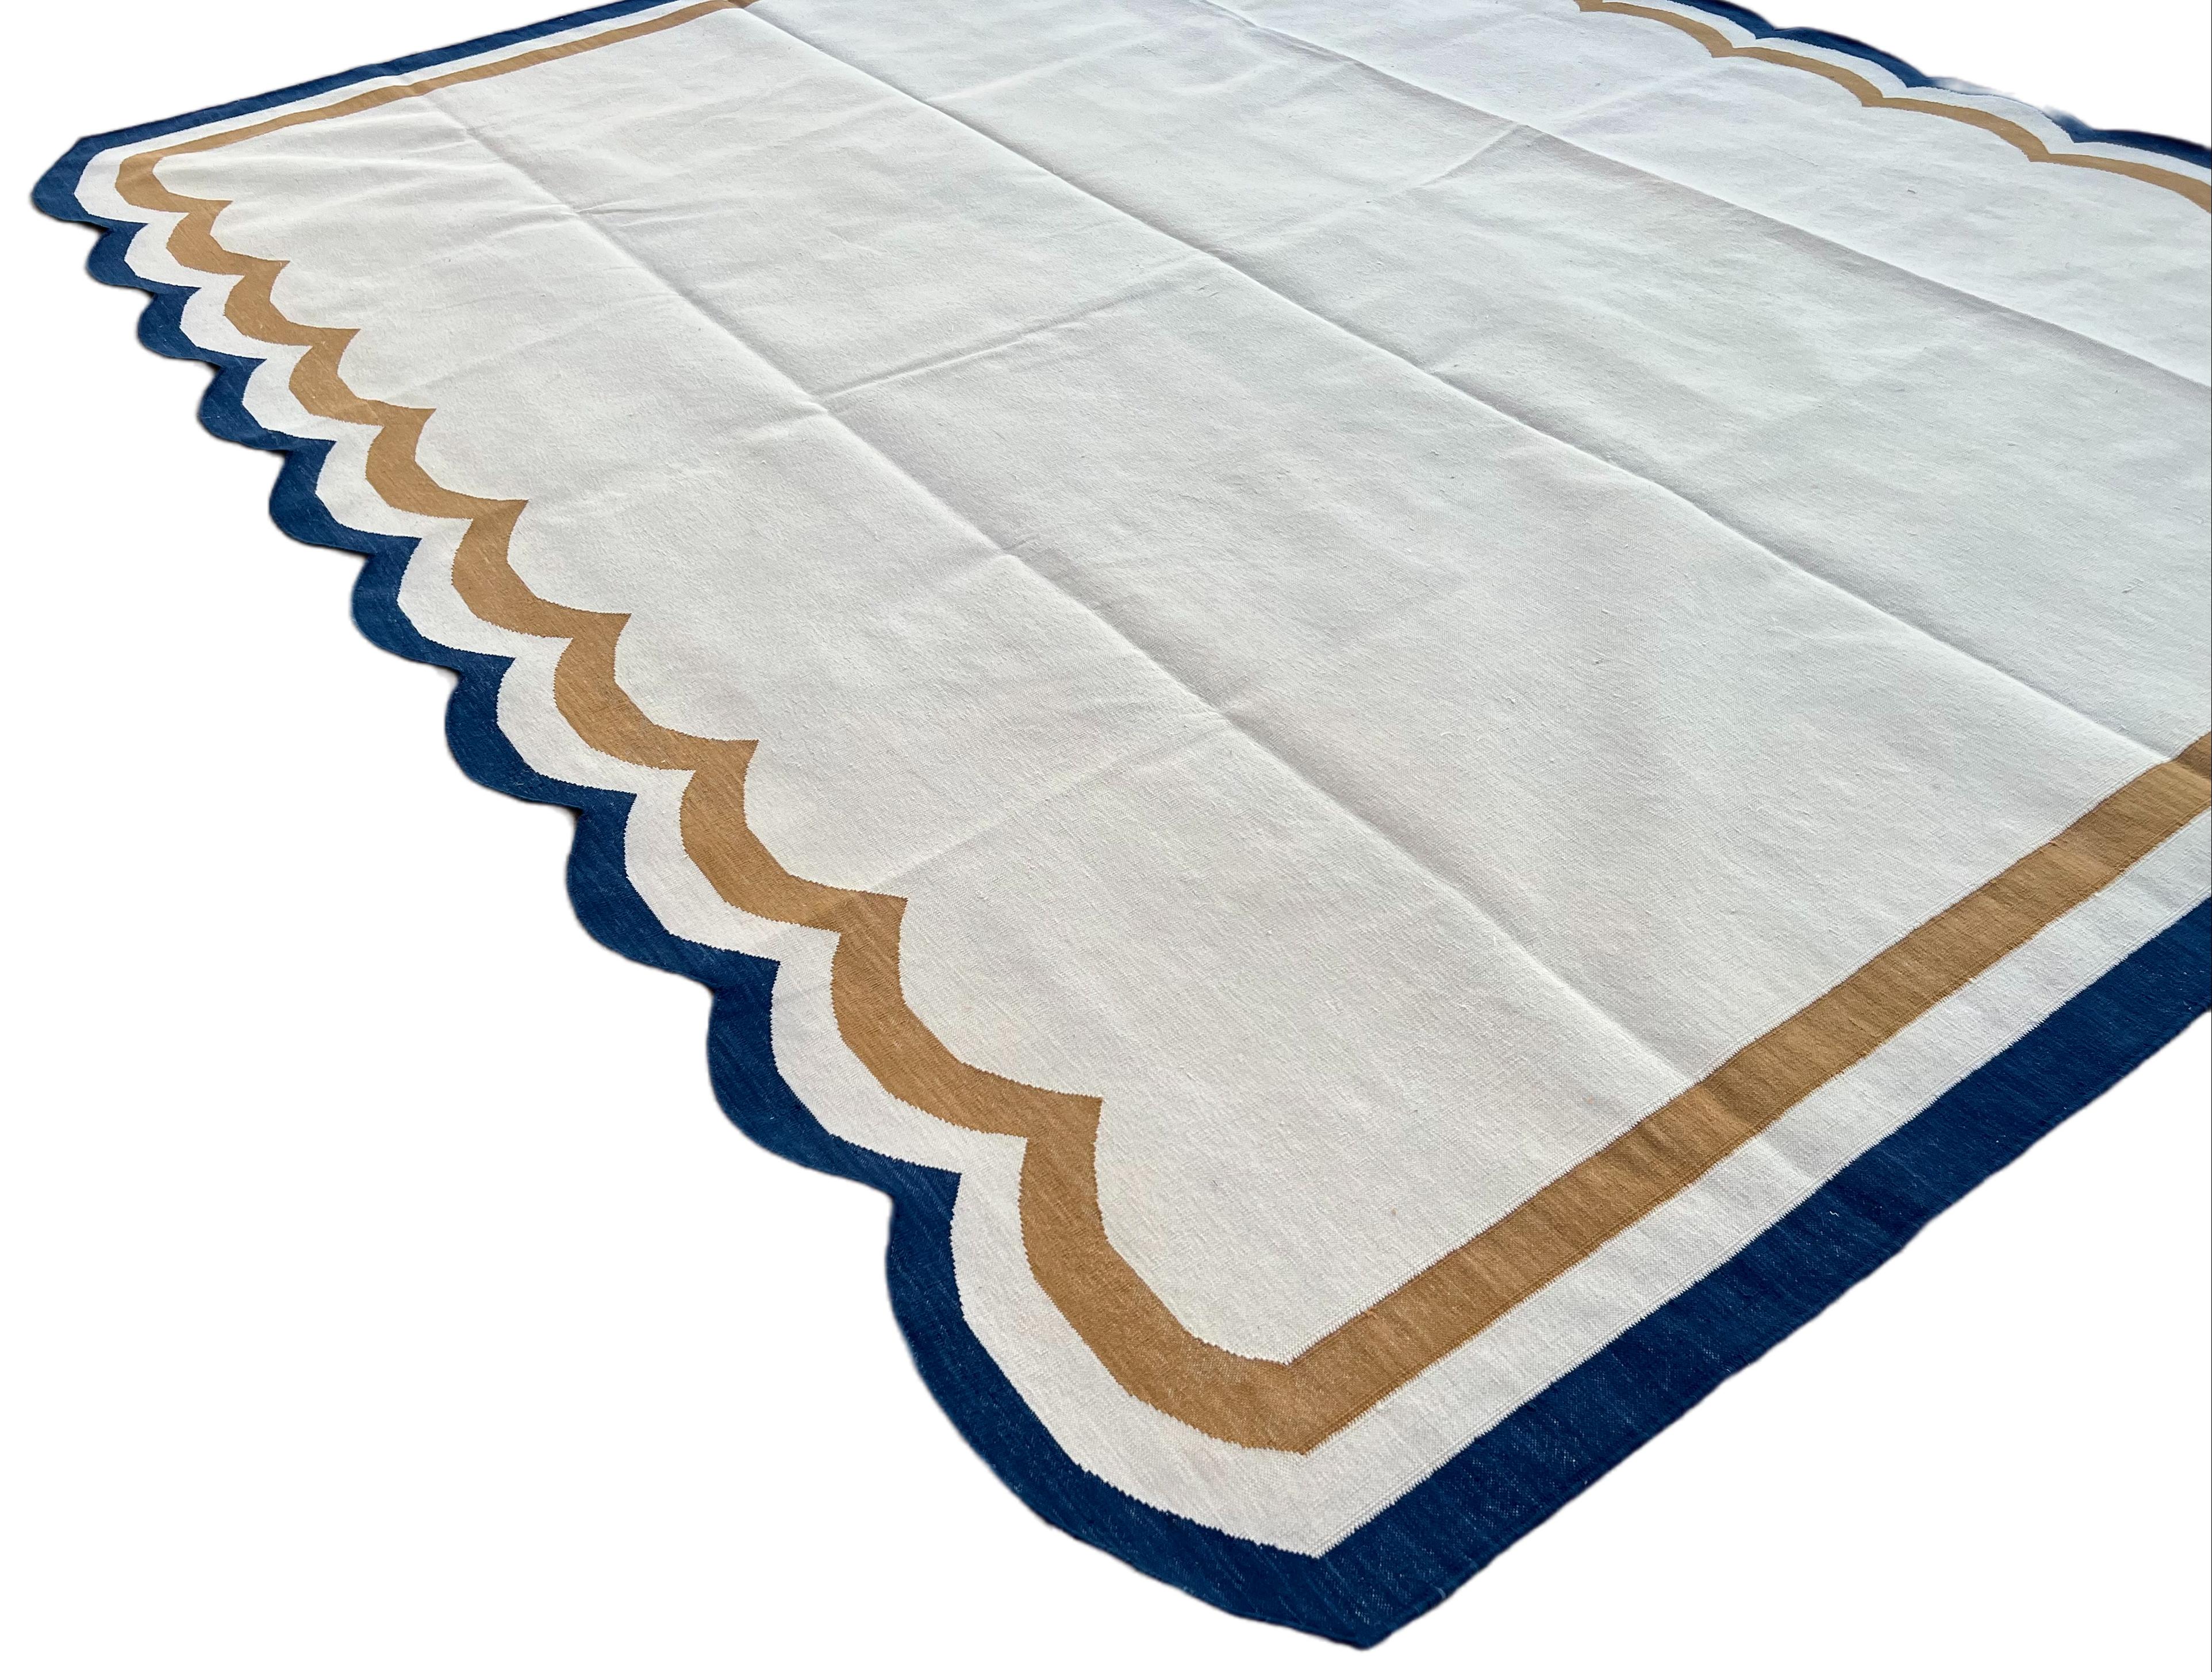 Hand-Woven Handmade Cotton Area Flat Weave Rug, 8x10 Cream And Blue Scallop Striped Dhurrie For Sale